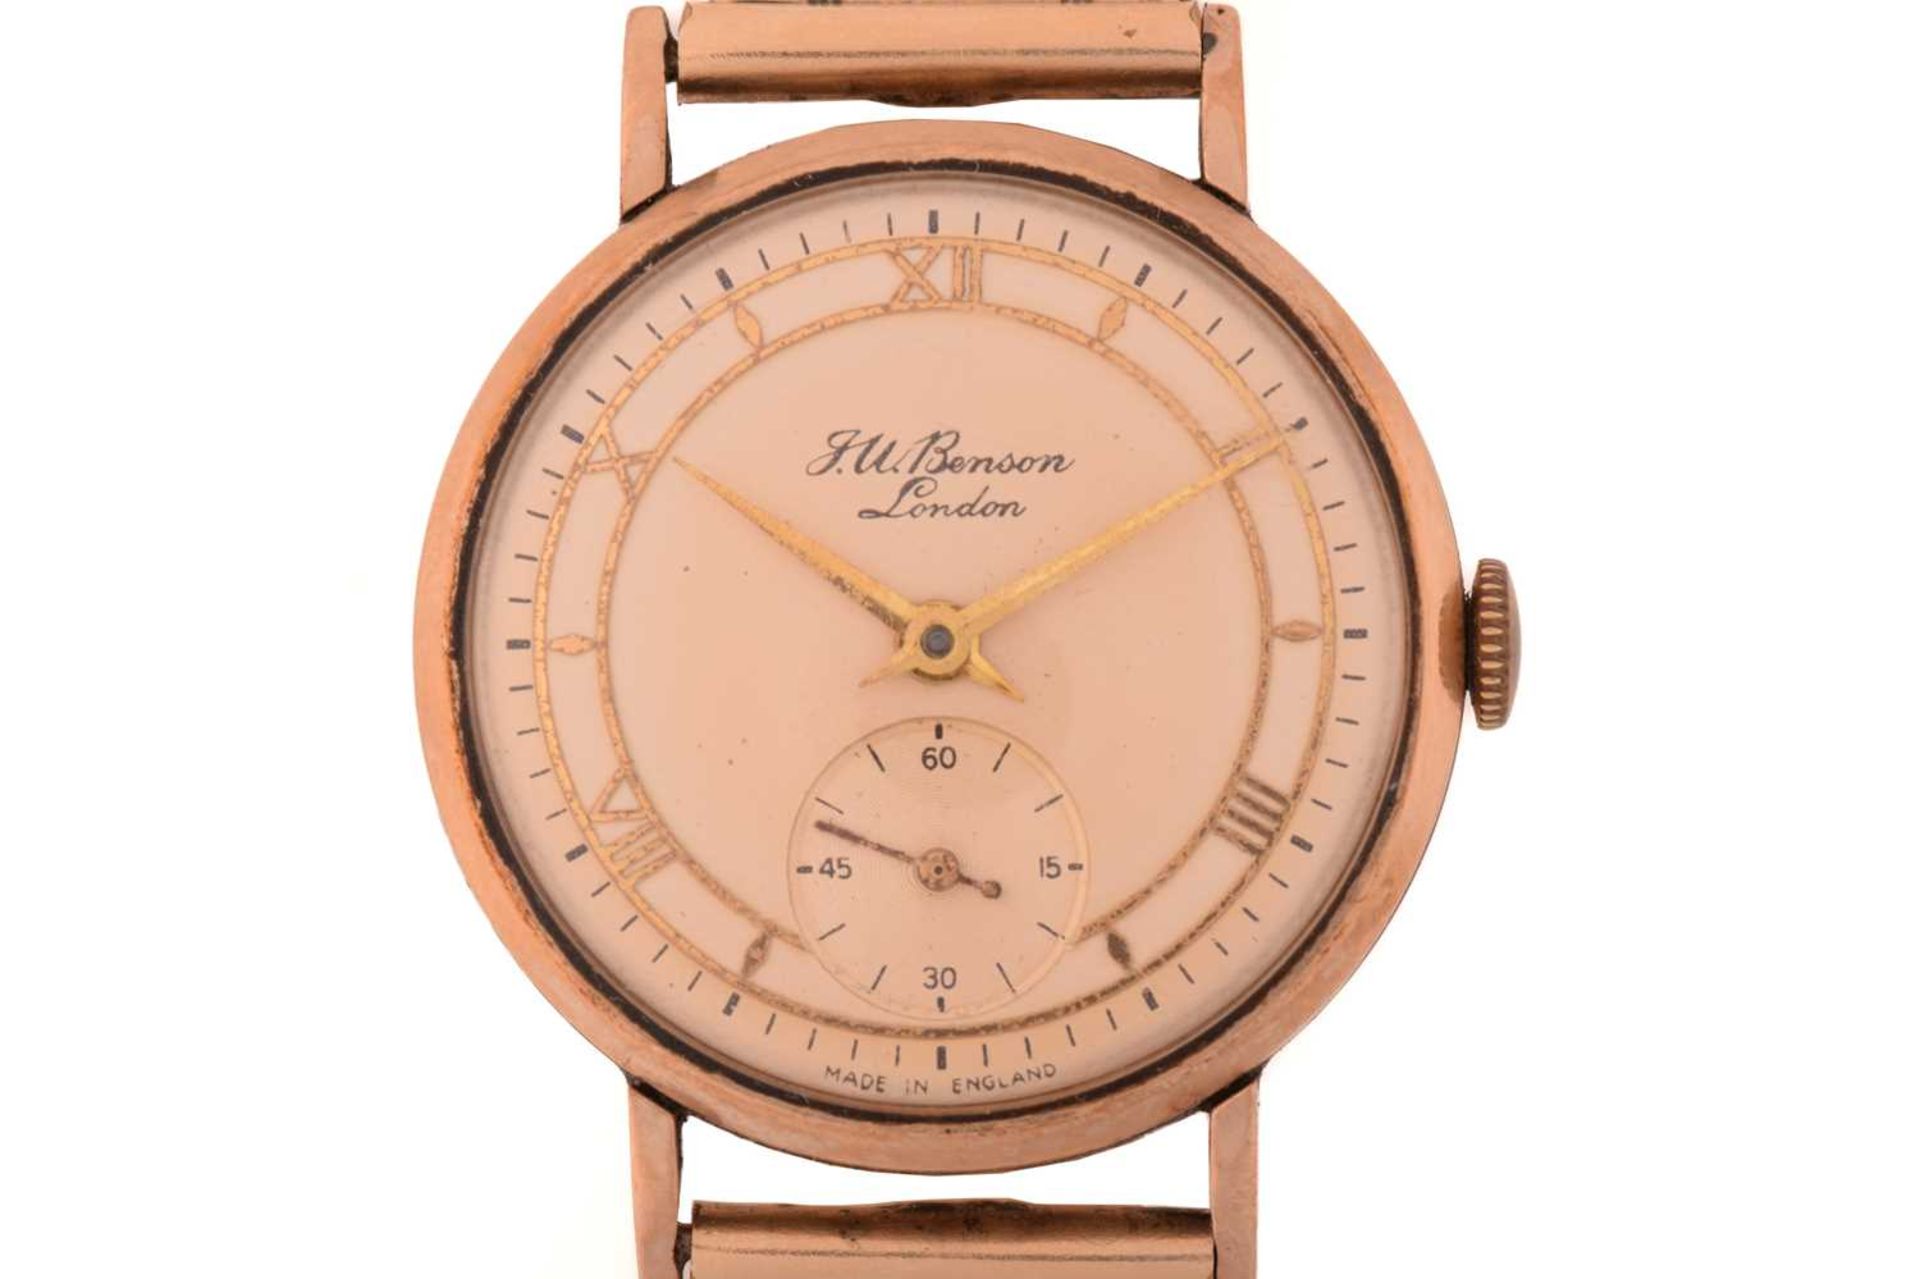 A 1955 JW Benson yellow metal manual wind wristwatch, the cream dial having Roman numerals and - Image 2 of 8